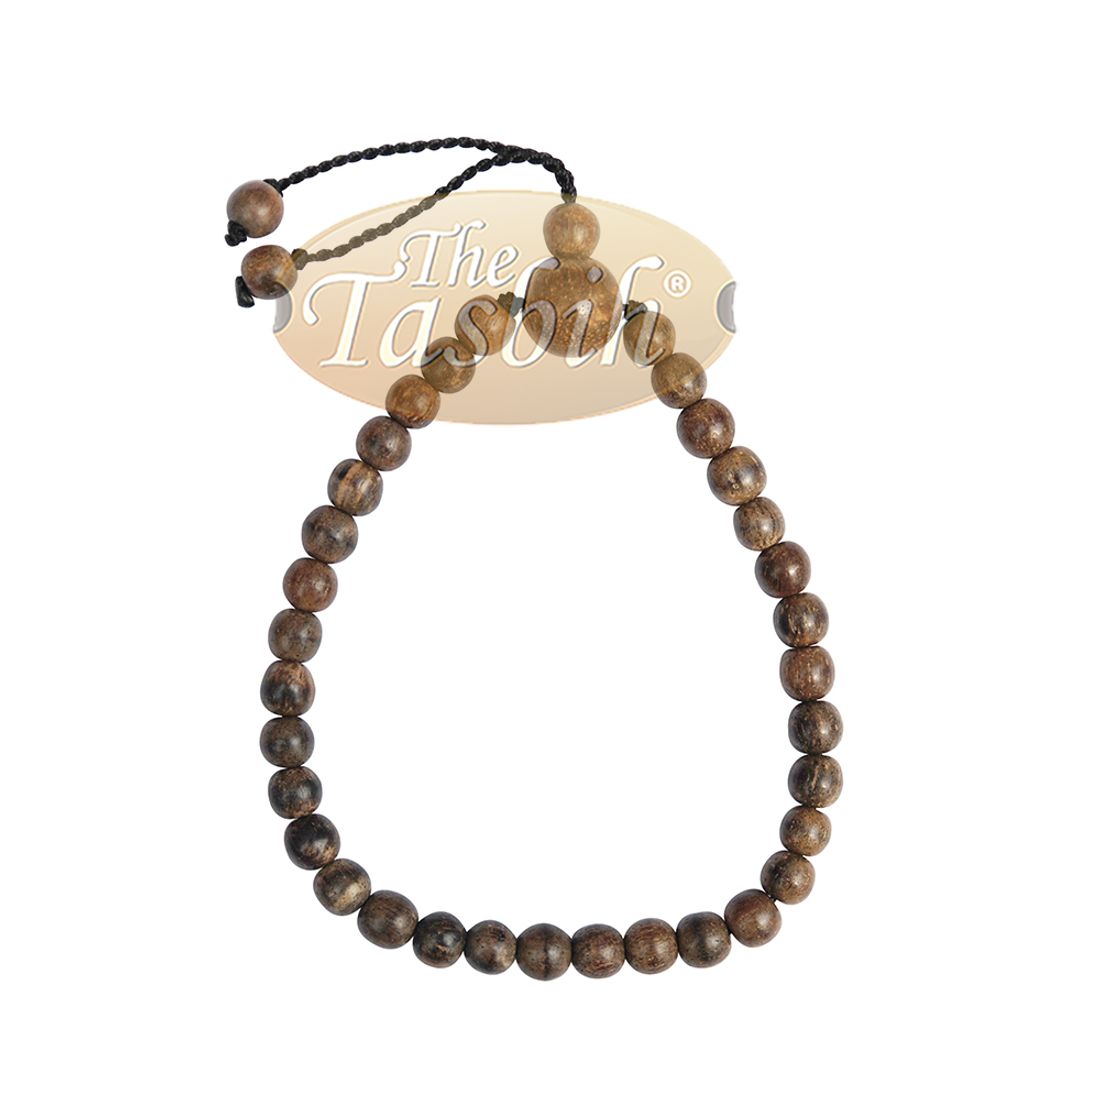 Small 5mm Oud Aloeswood Tasbih Bracelet 33-Bead Adjustable 6-7 Inch in GIFT BOX